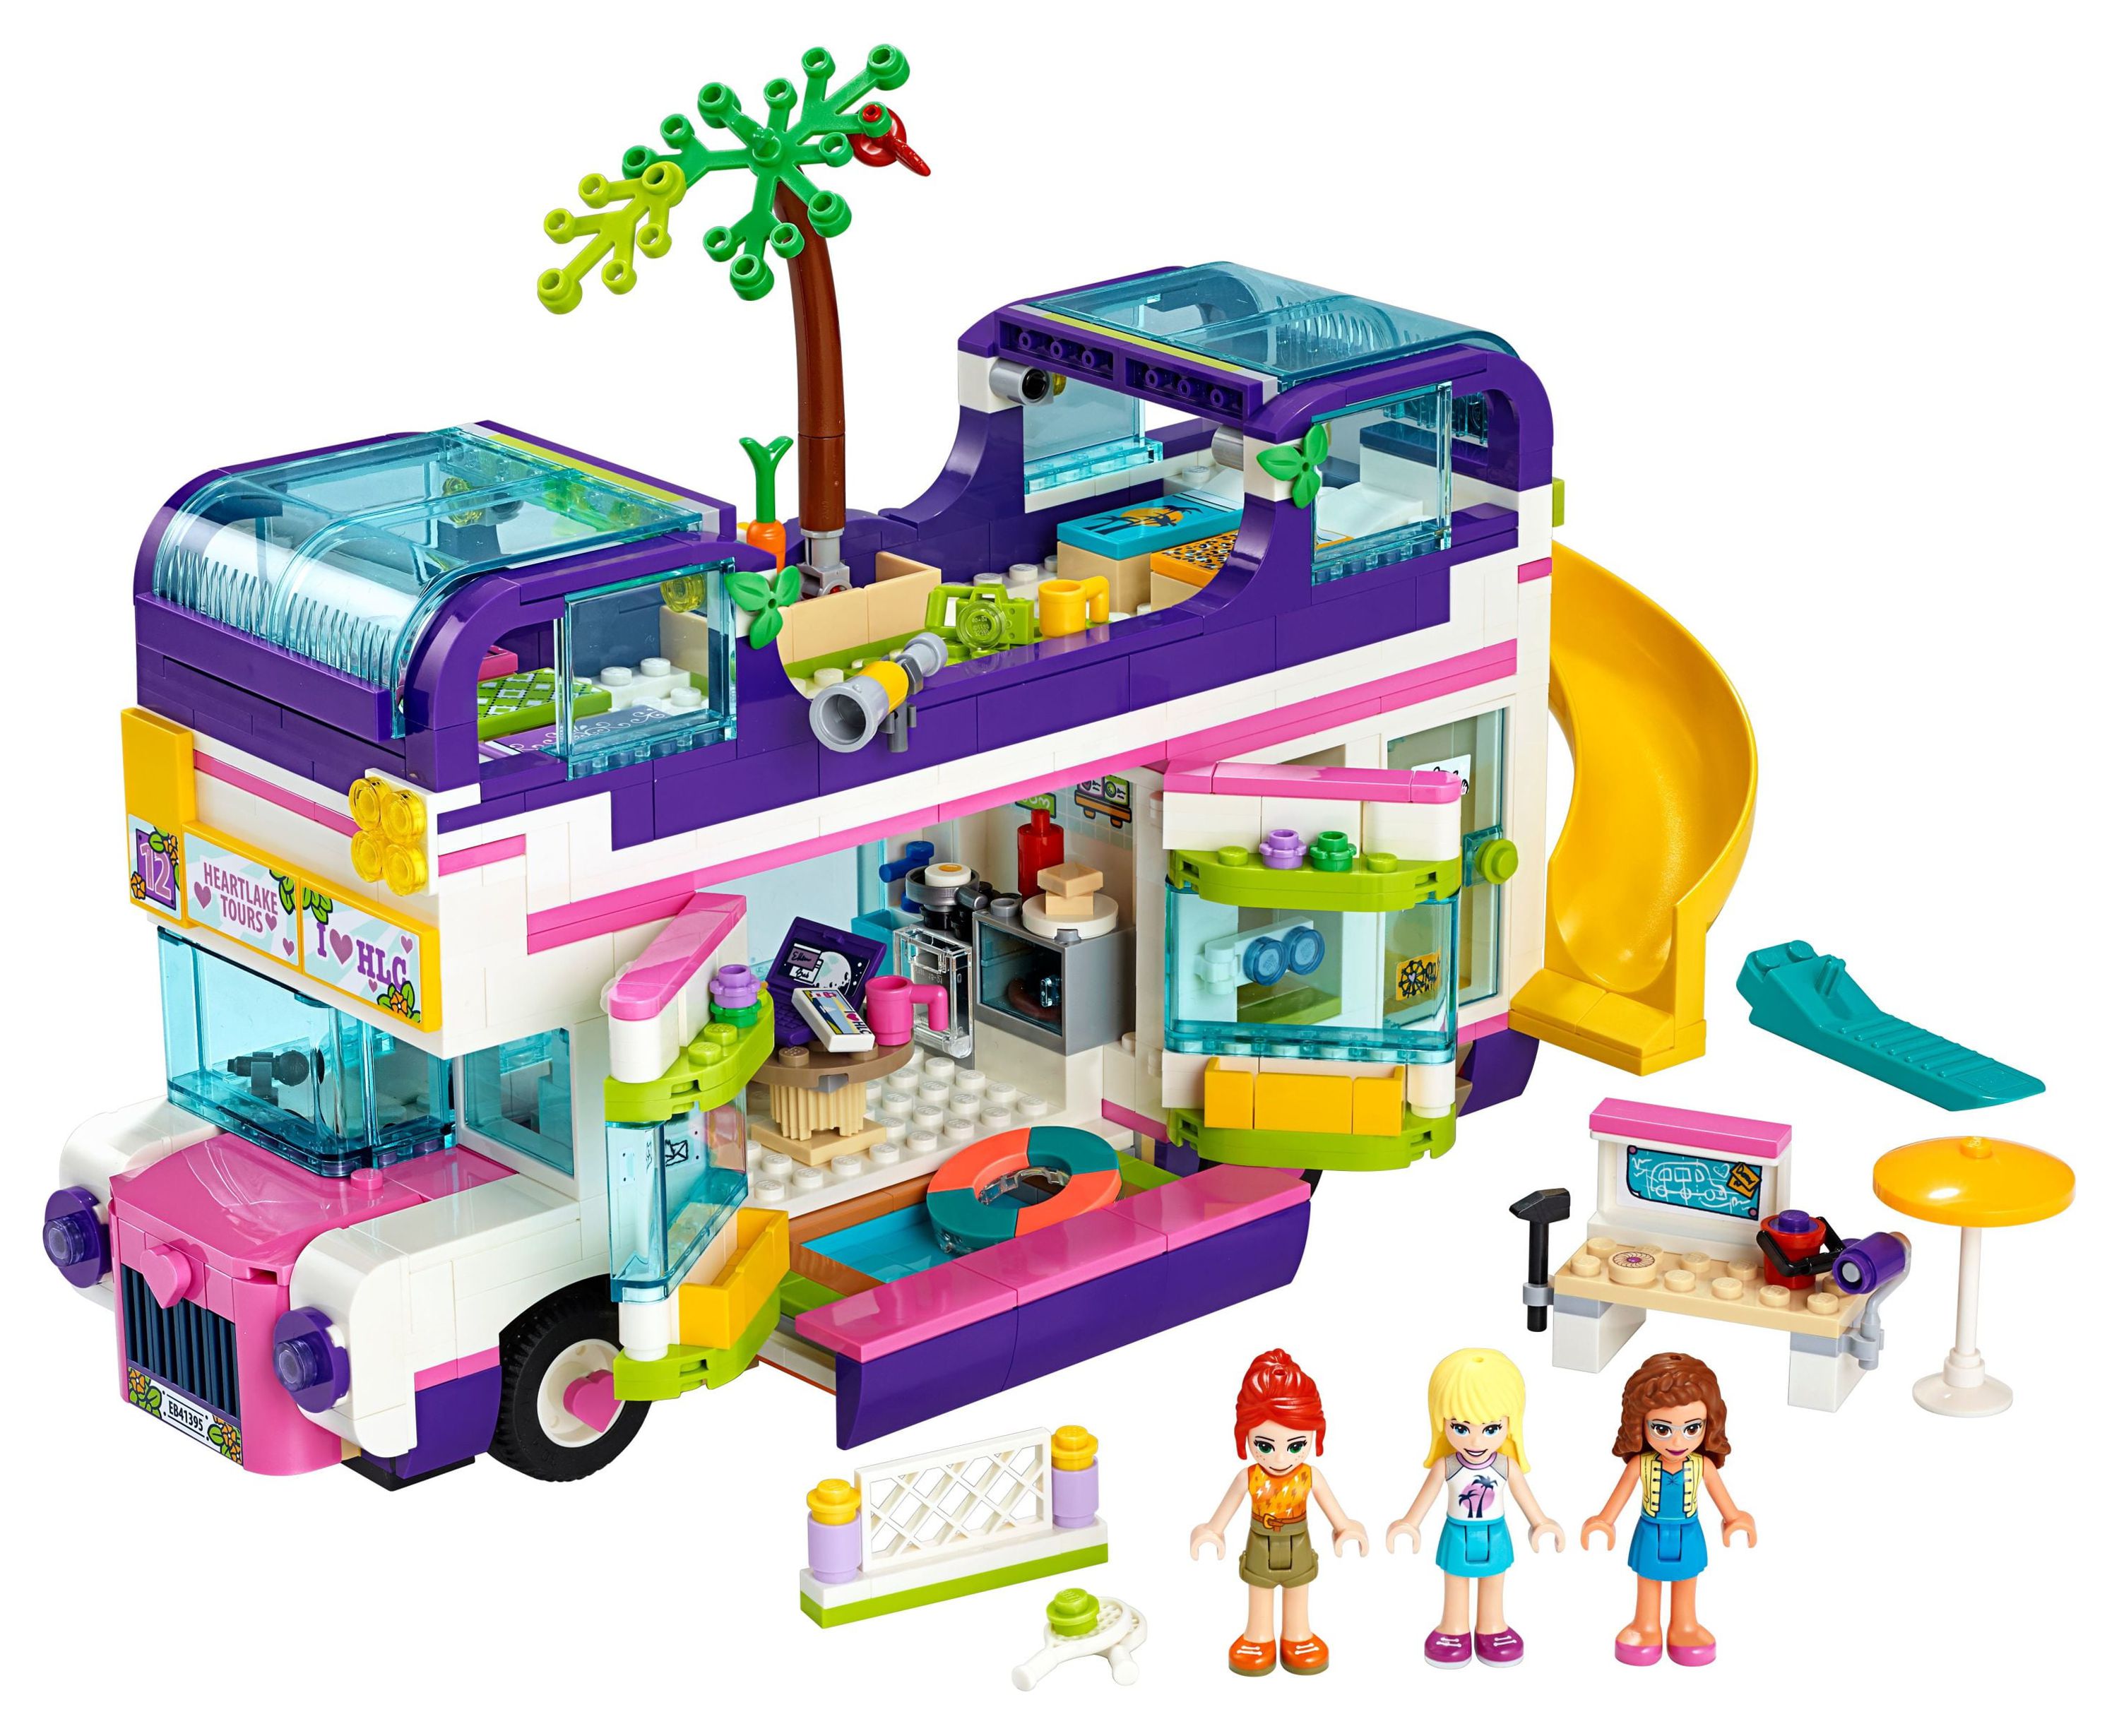 LEGO Friends Friendship Bus 41395 LEGO Heartlake City Toy Playset (778 Pieces) - image 3 of 7